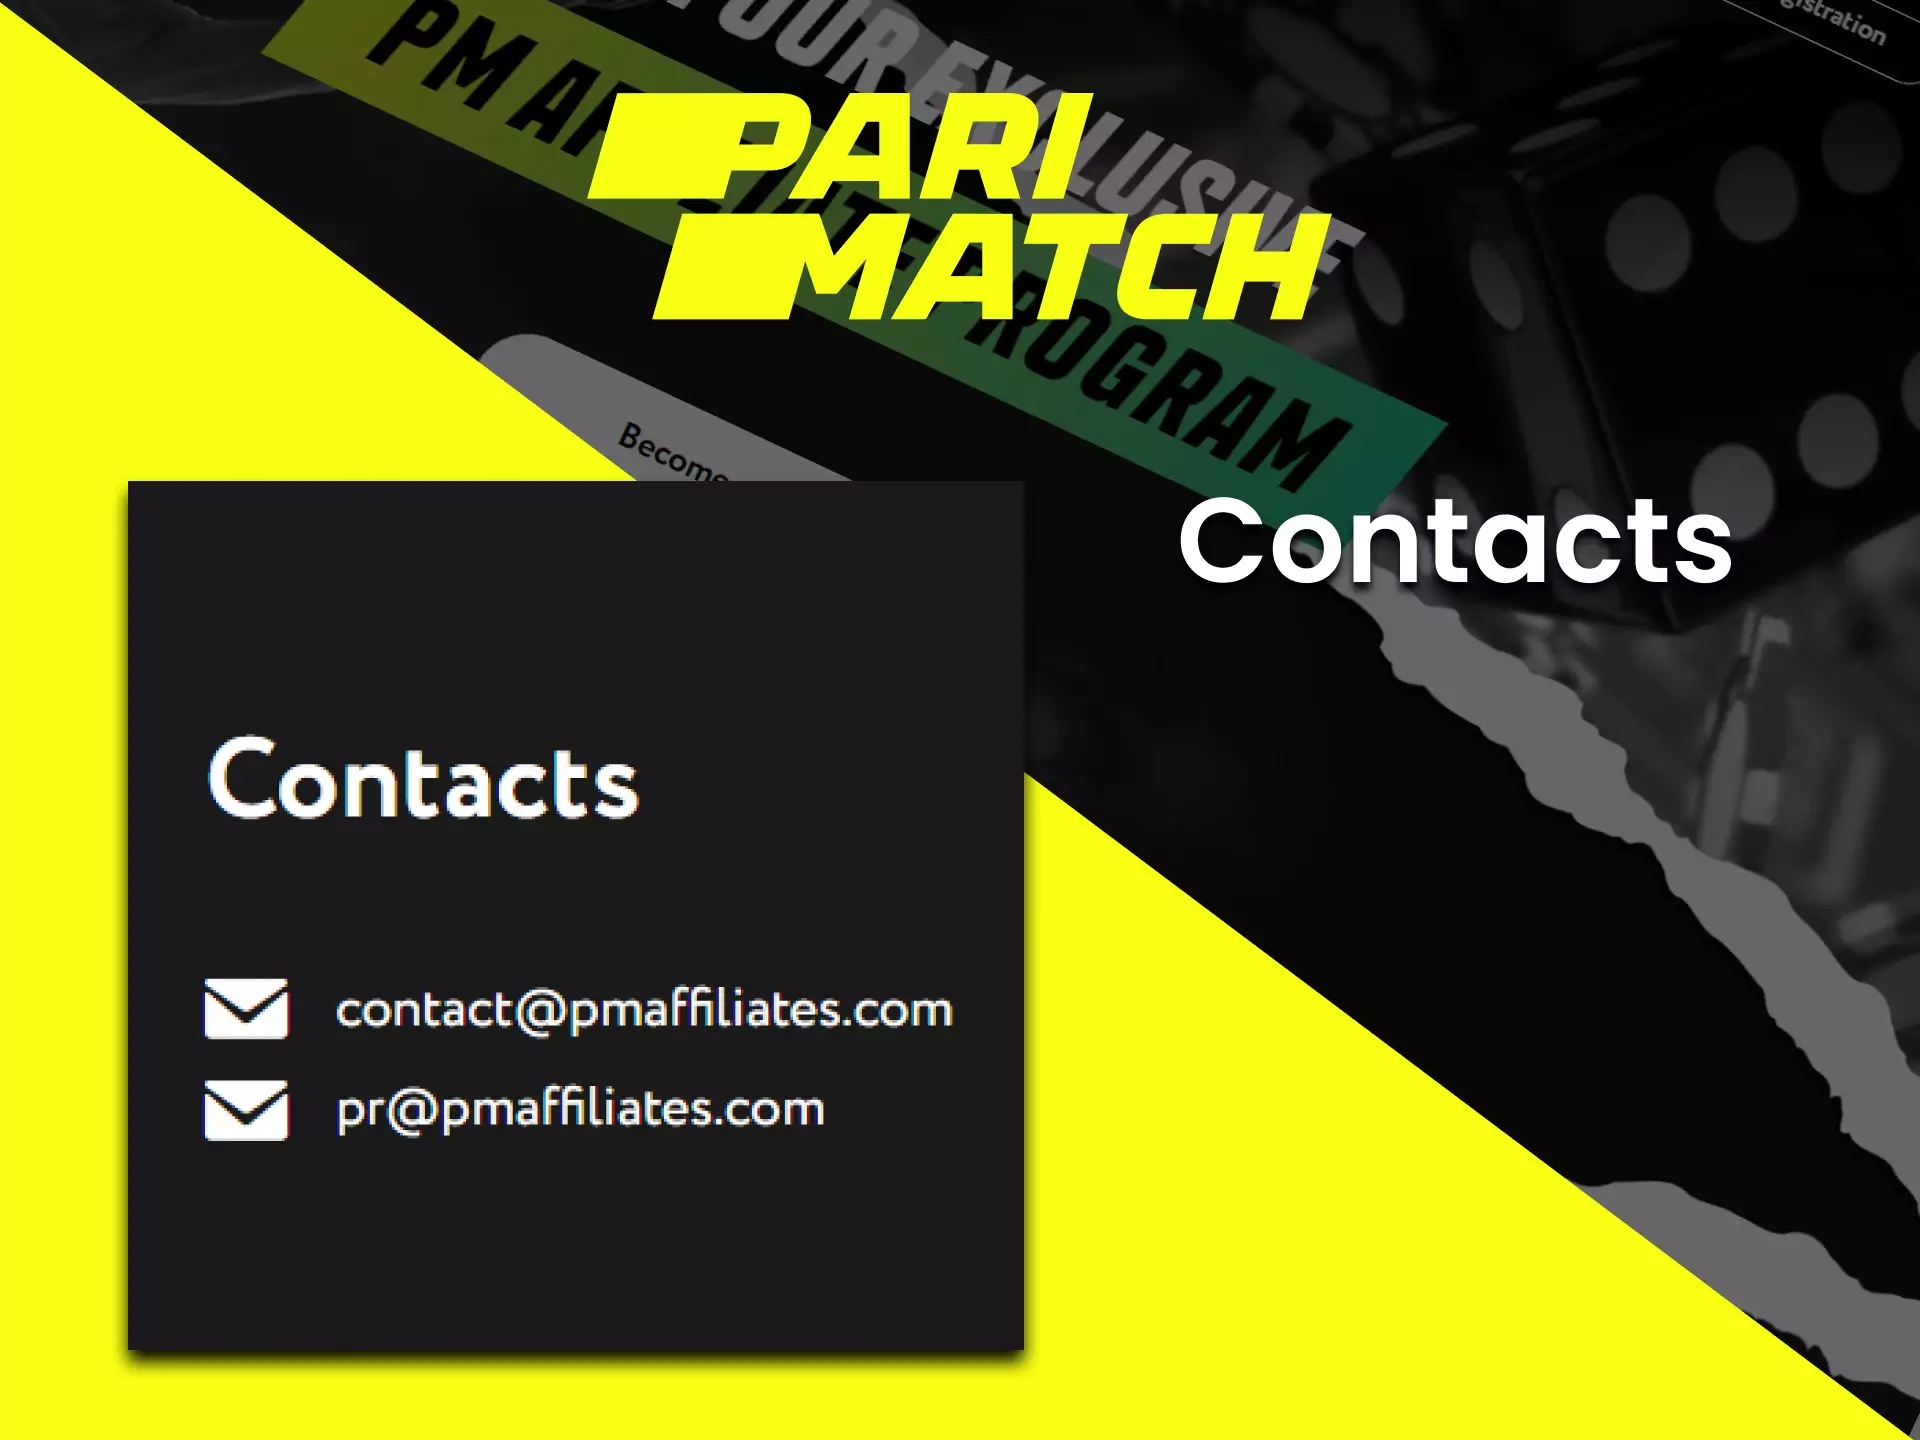 Remember the contact list of the Parimatch affiliate club.